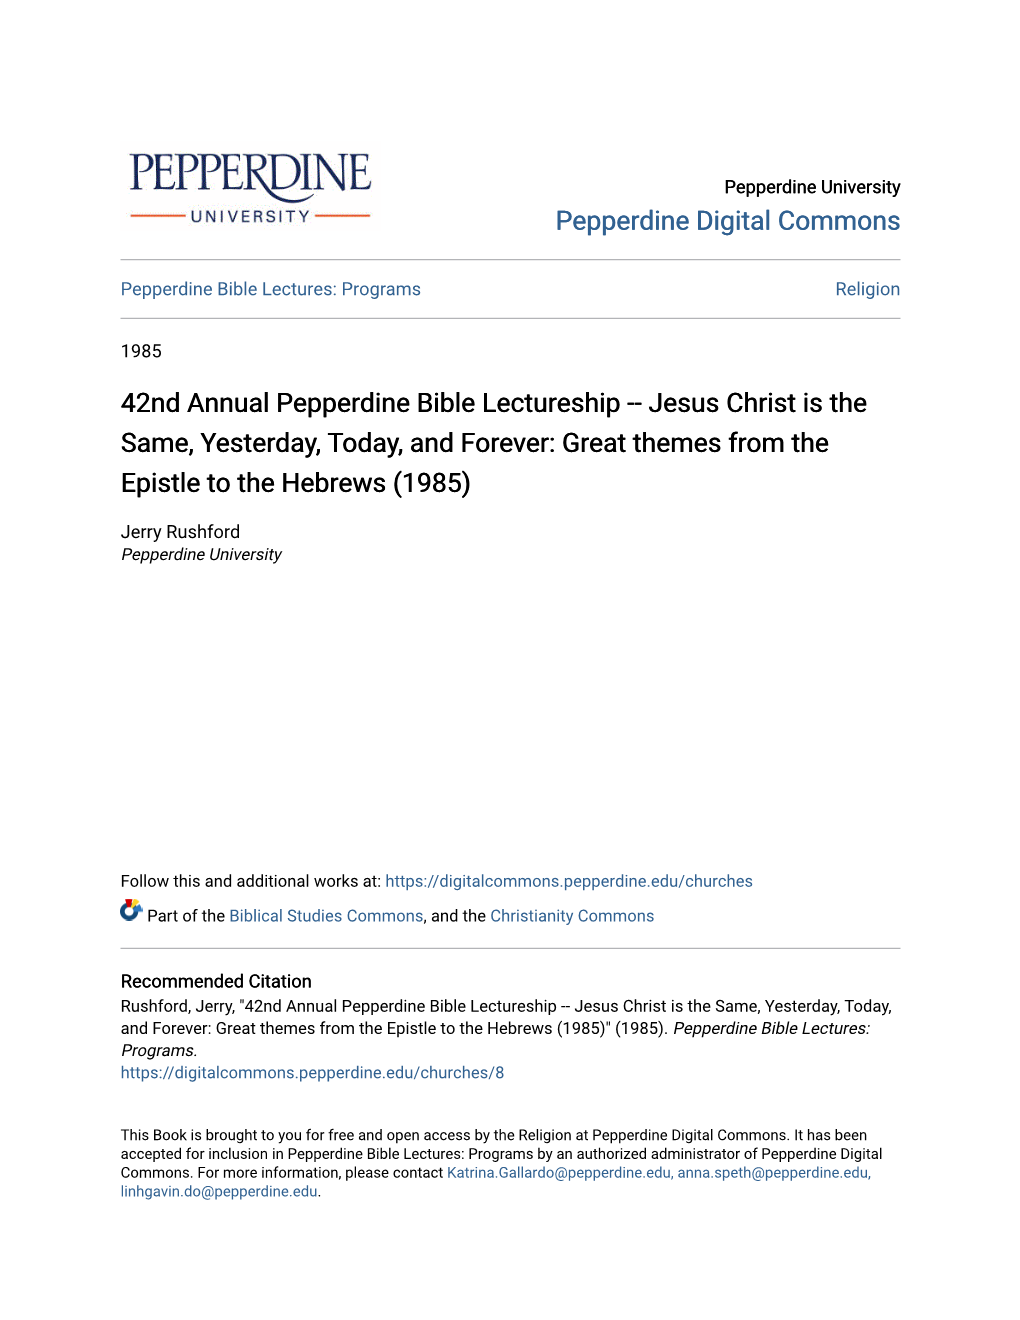 42Nd Annual Pepperdine Bible Lectureship -- Jesus Christ Is the Same, Yesterday, Today, and Forever: Great Themes from the Epistle to the Hebrews (1985)